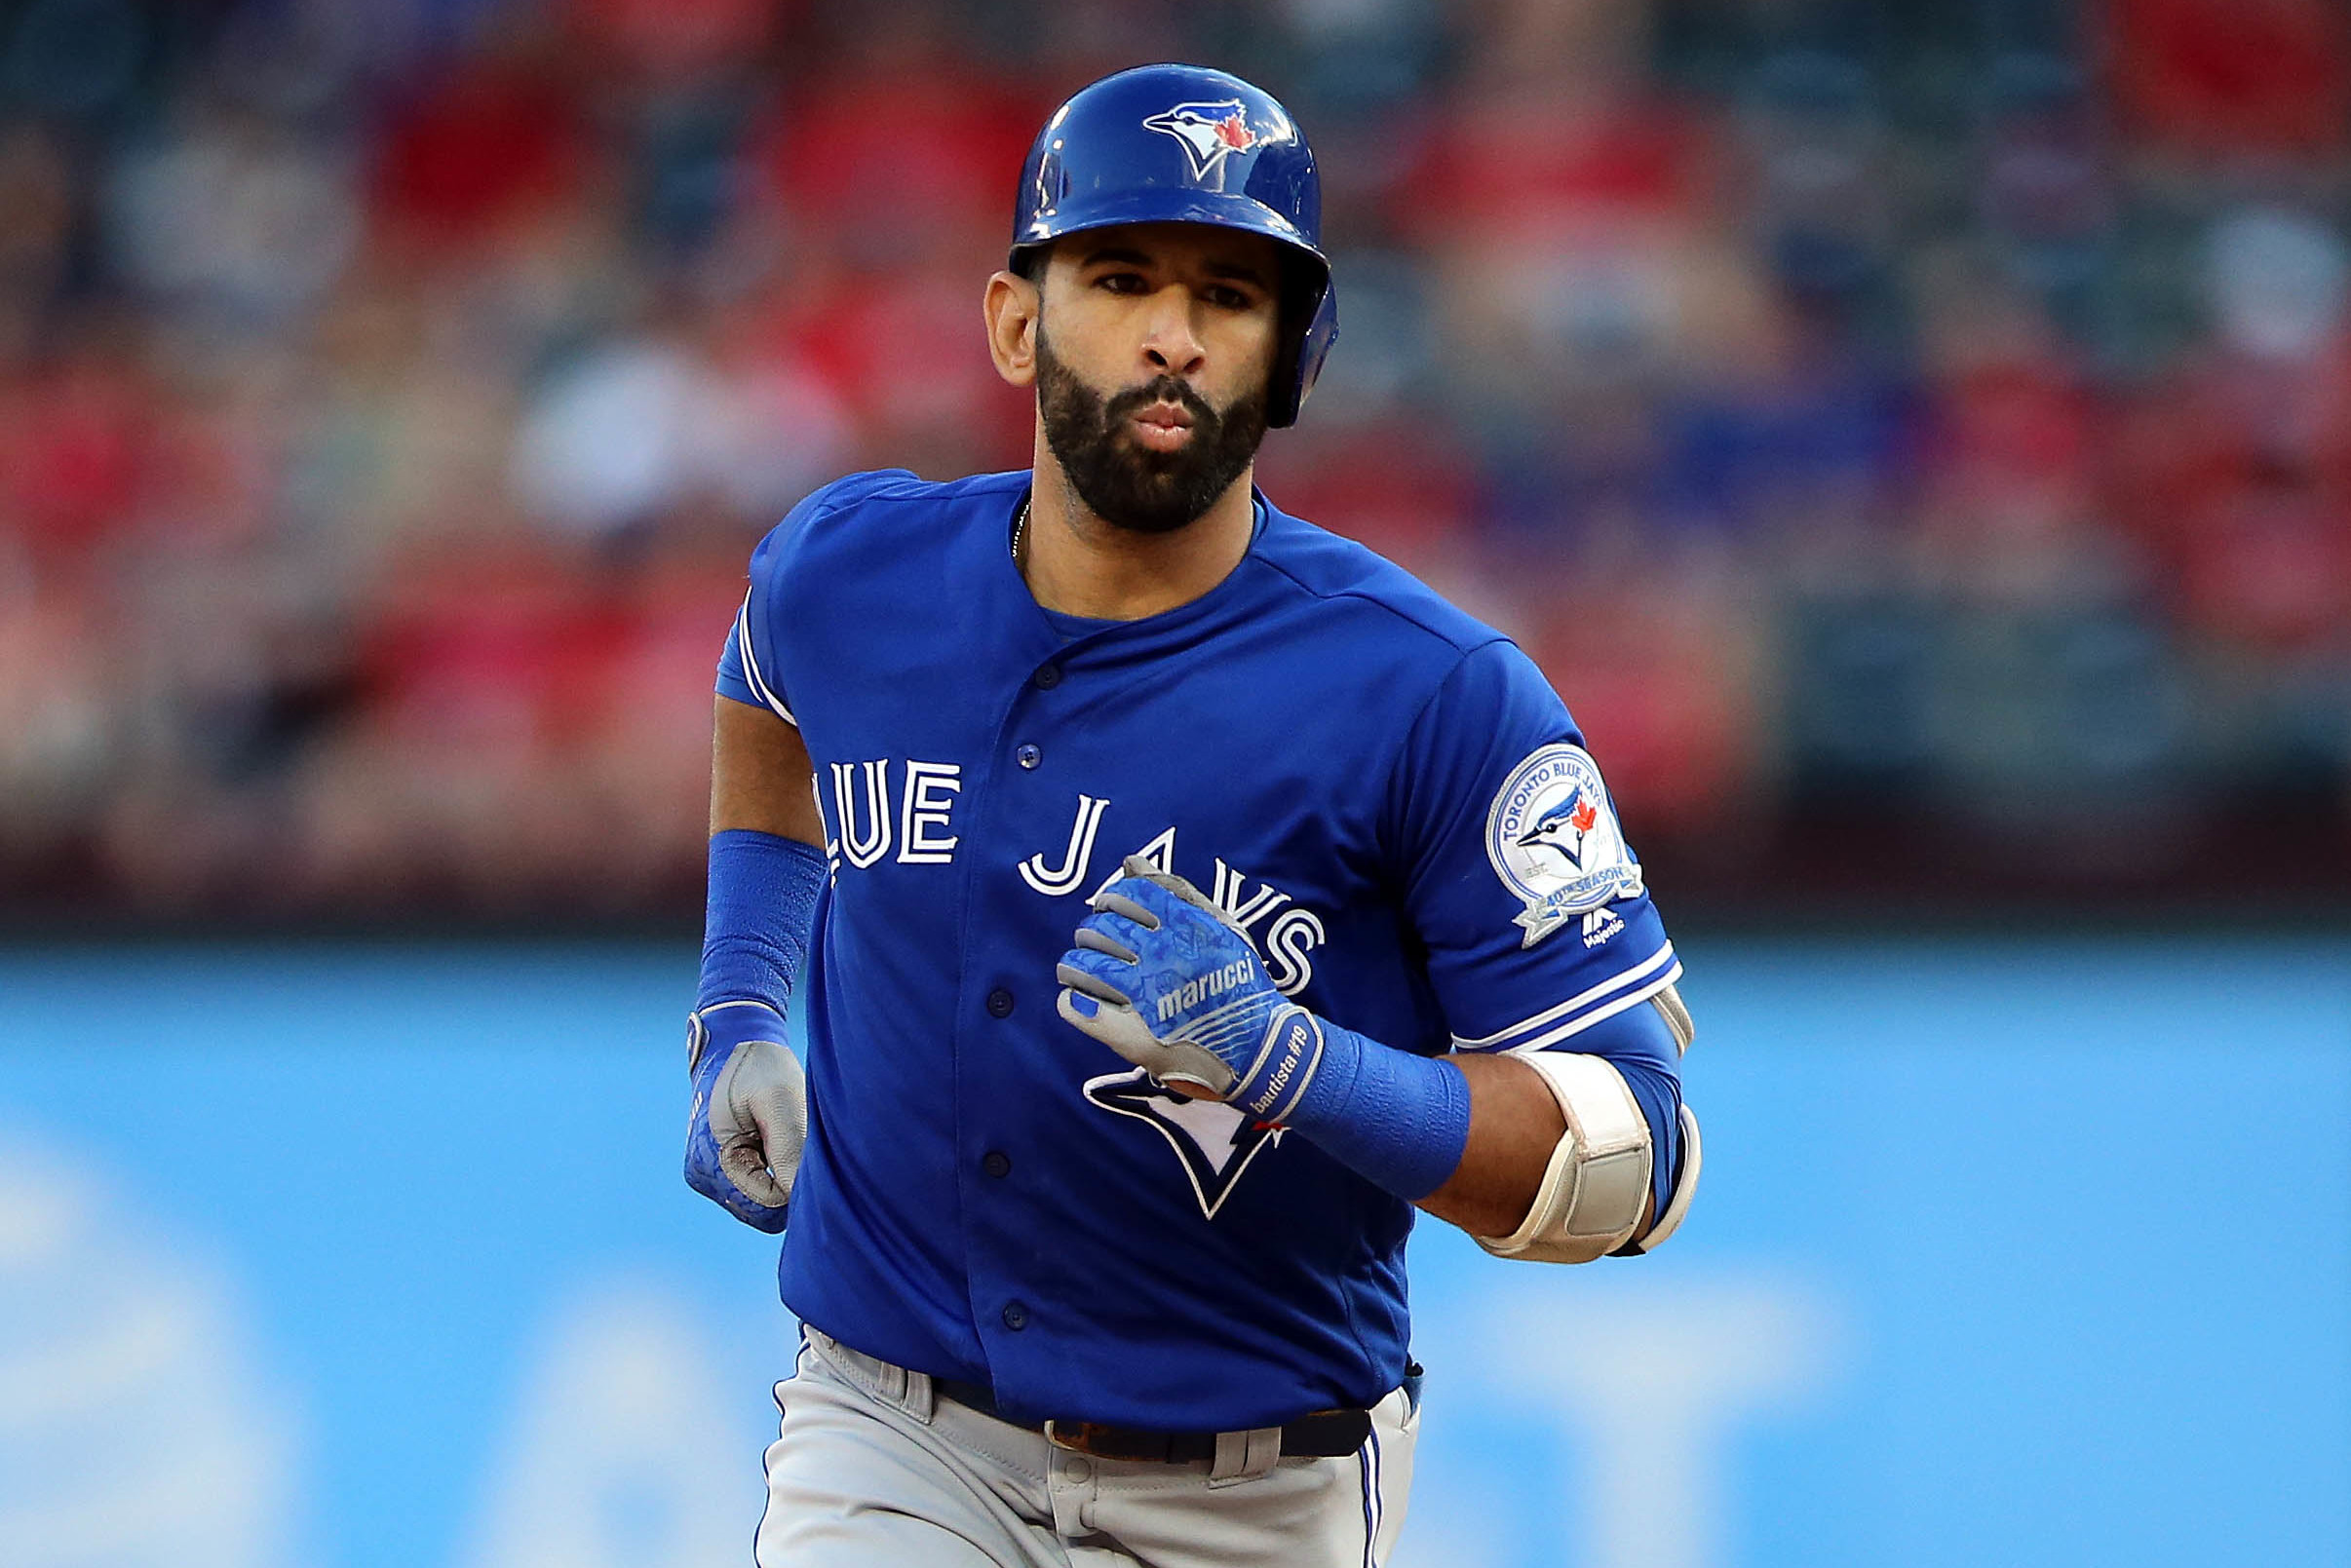 This is a 2012 photo of Jose Bautista of the Toronto Blue Jays baseball  team. This image reflects the Blue Jays' spring training roster as of  Friday, March 2, 2012, when this